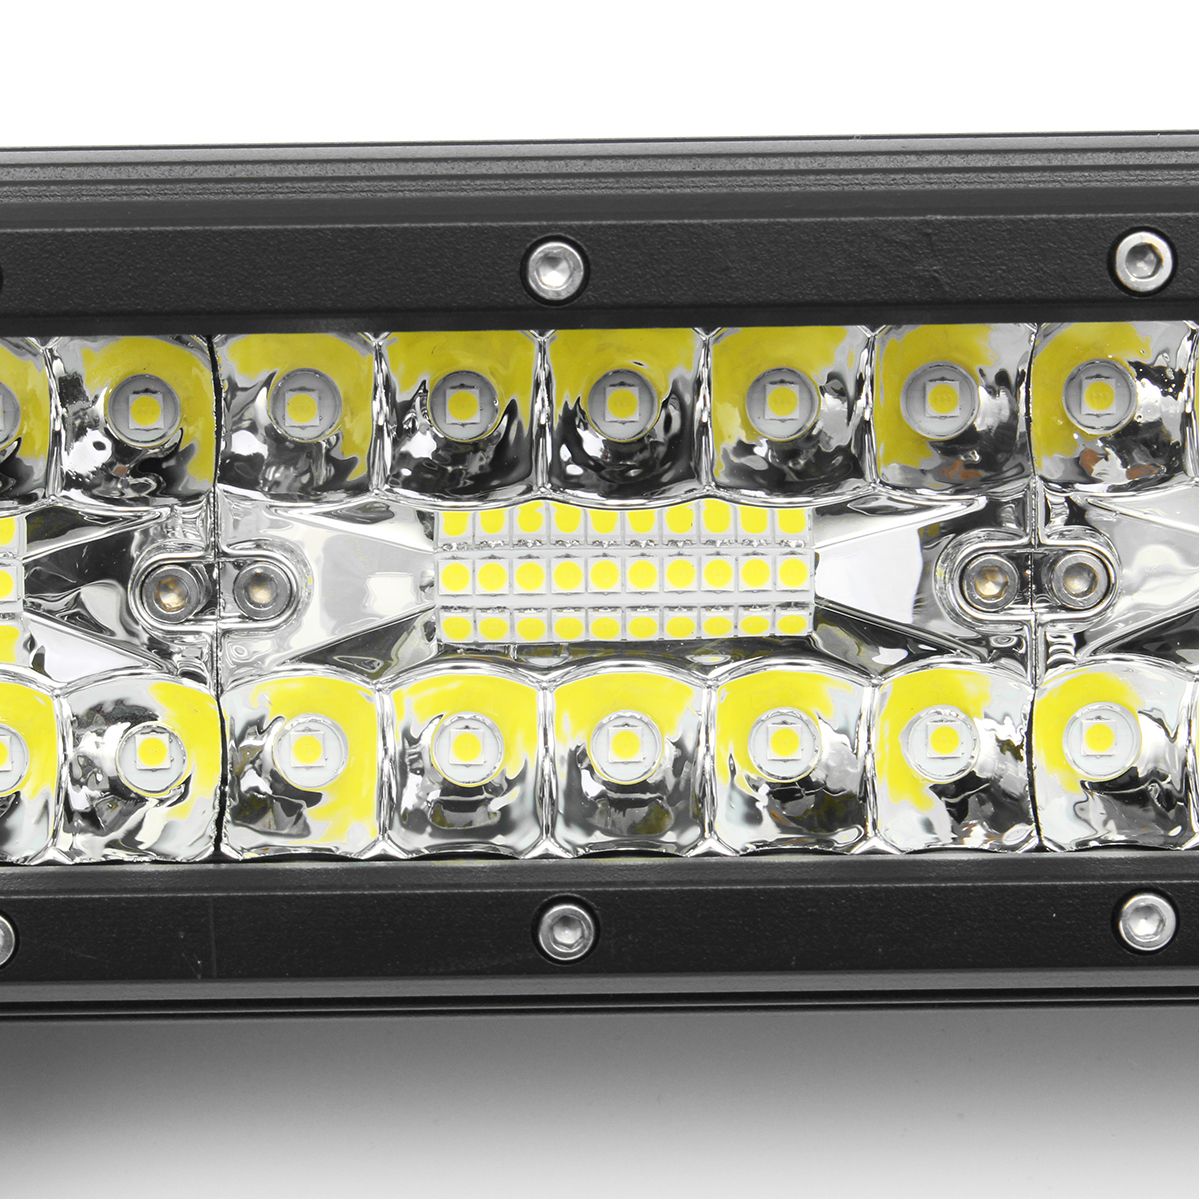 23quot-160LED-White-6000K-Flood-Spot-Combo-IP68-Work-light-For-Offroad-4WD-SUV-DY82-480W-1673273